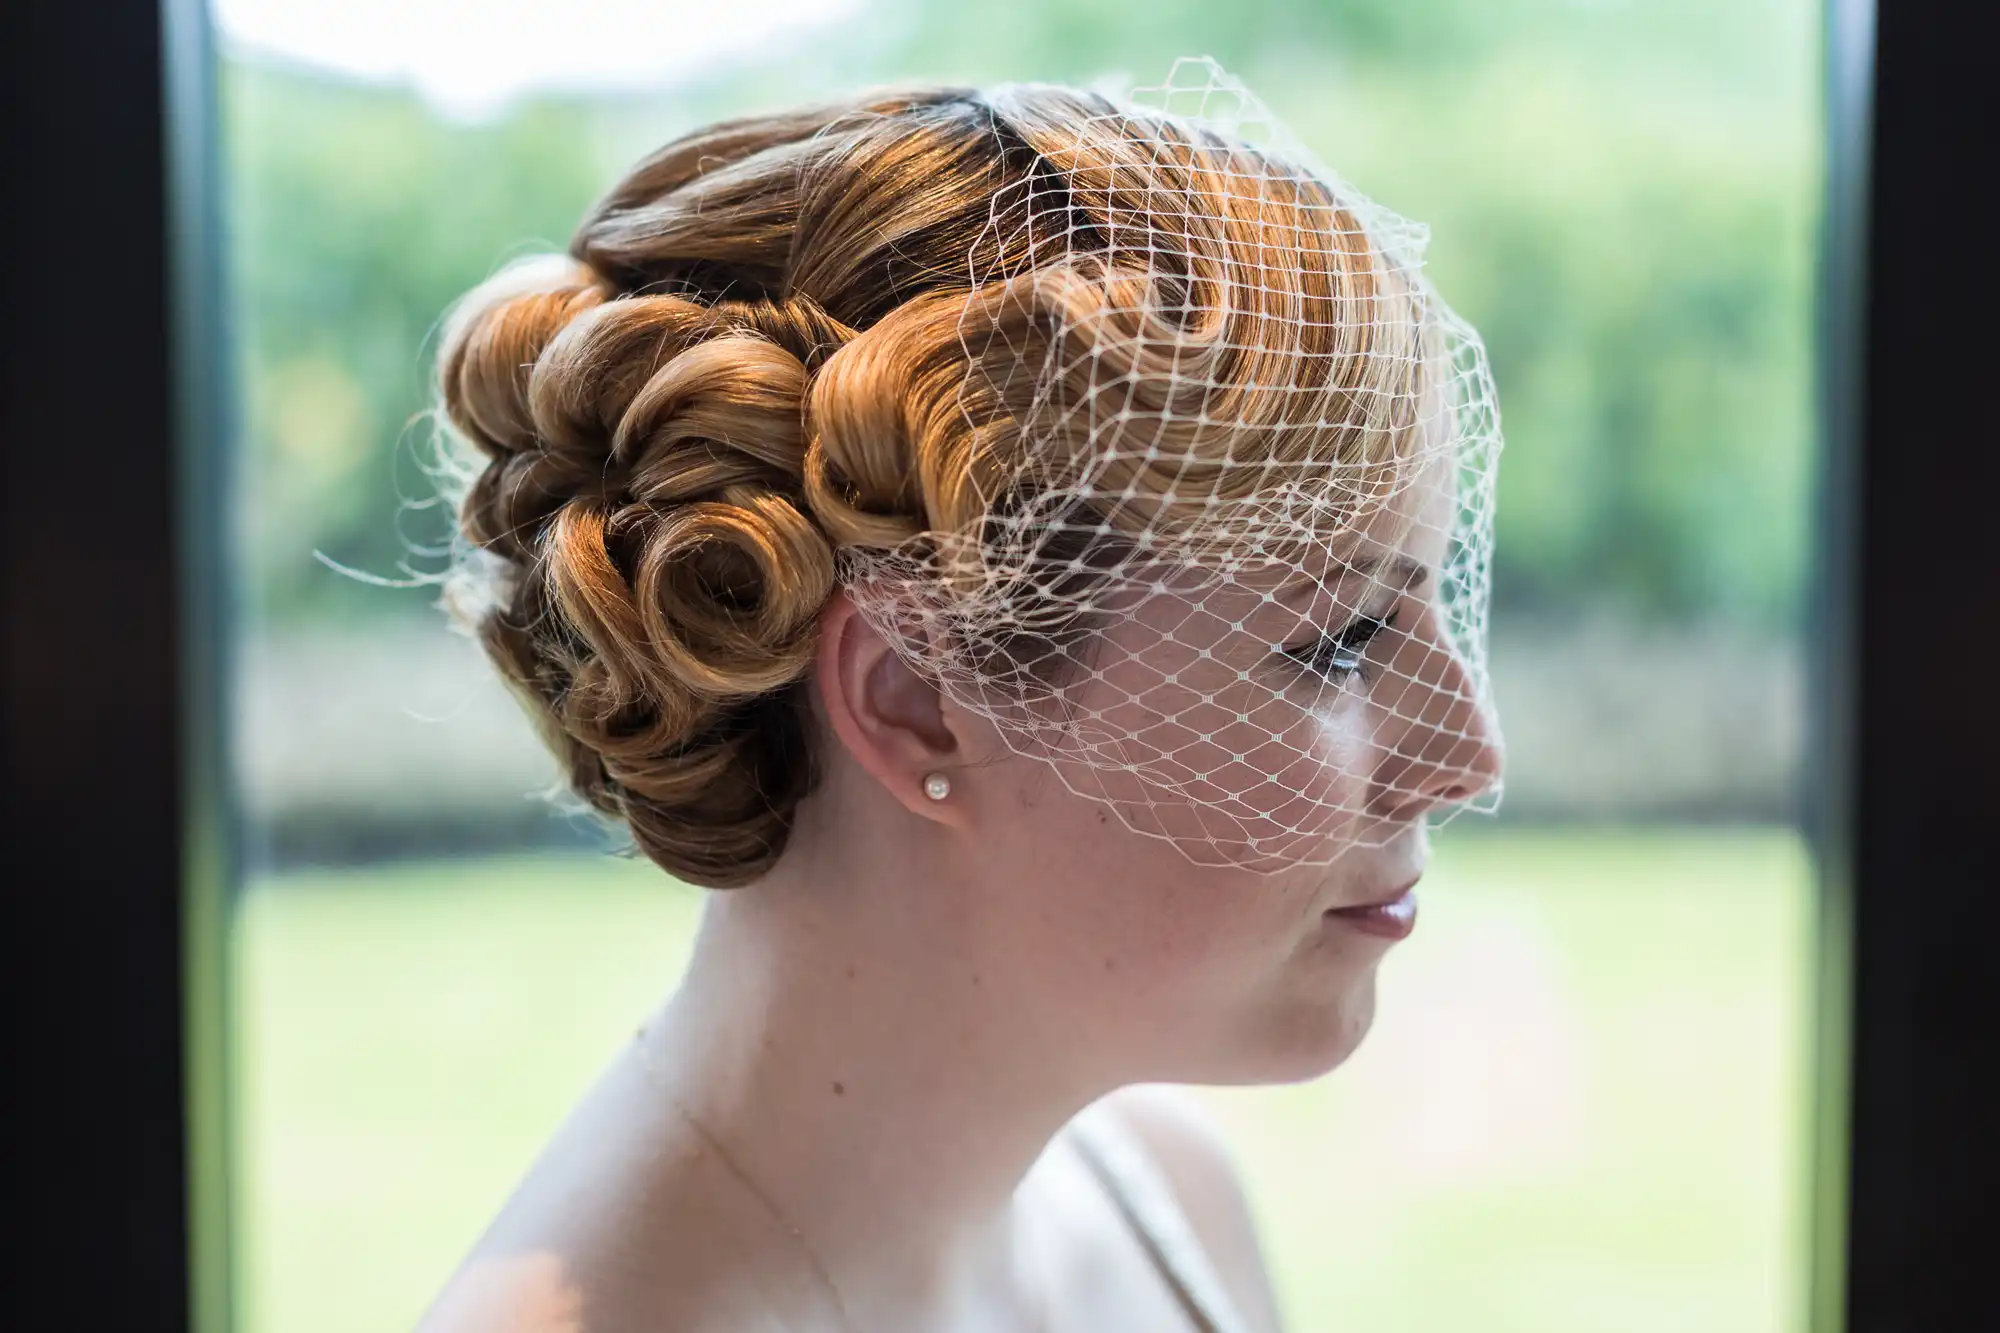 Profile of a woman gazing out a window, featuring an intricate updo hairstyle with a light birdcage veil.